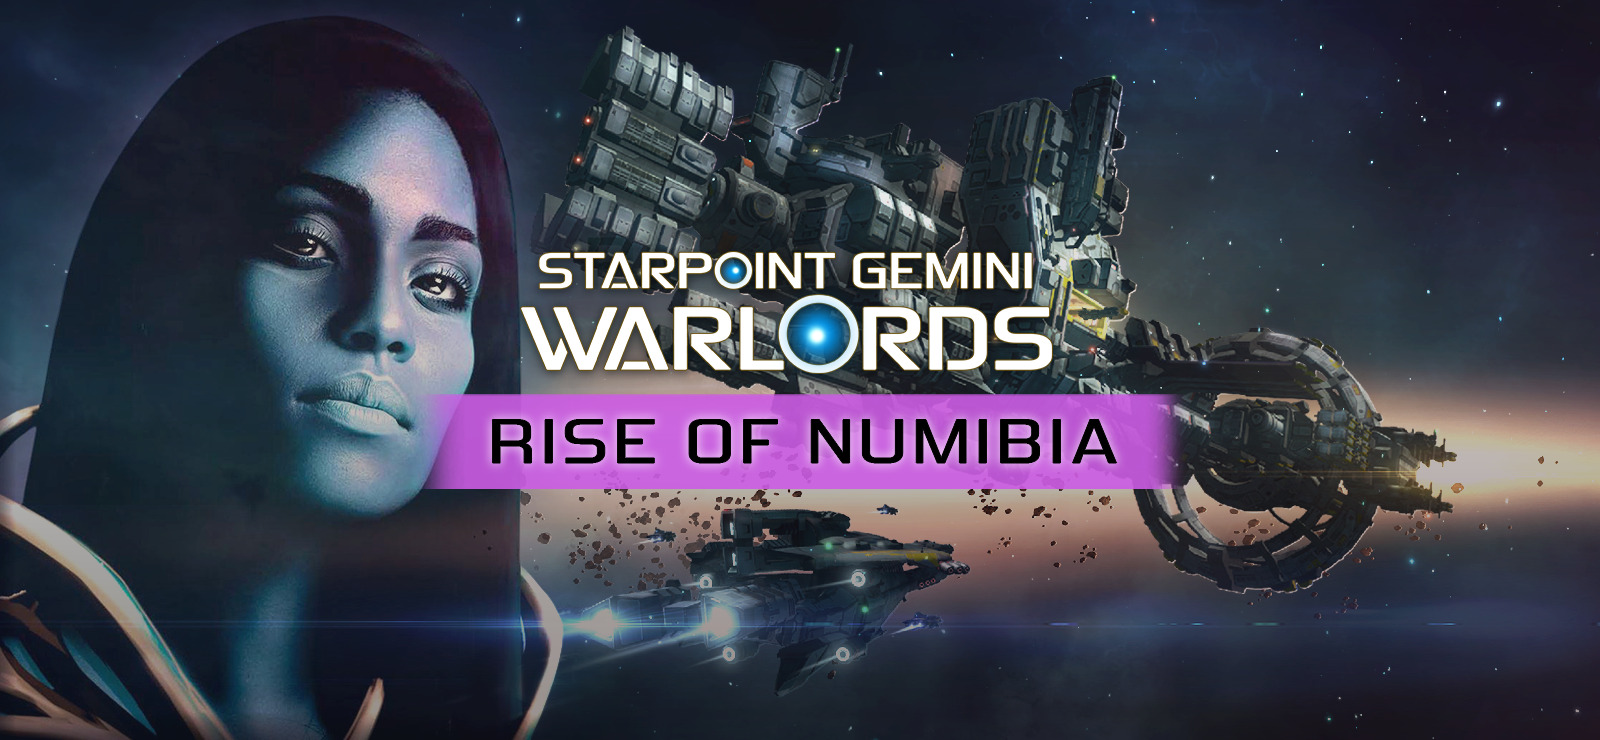 Starpoint Gemini Warlords Rise Of Numibia On Gog Com